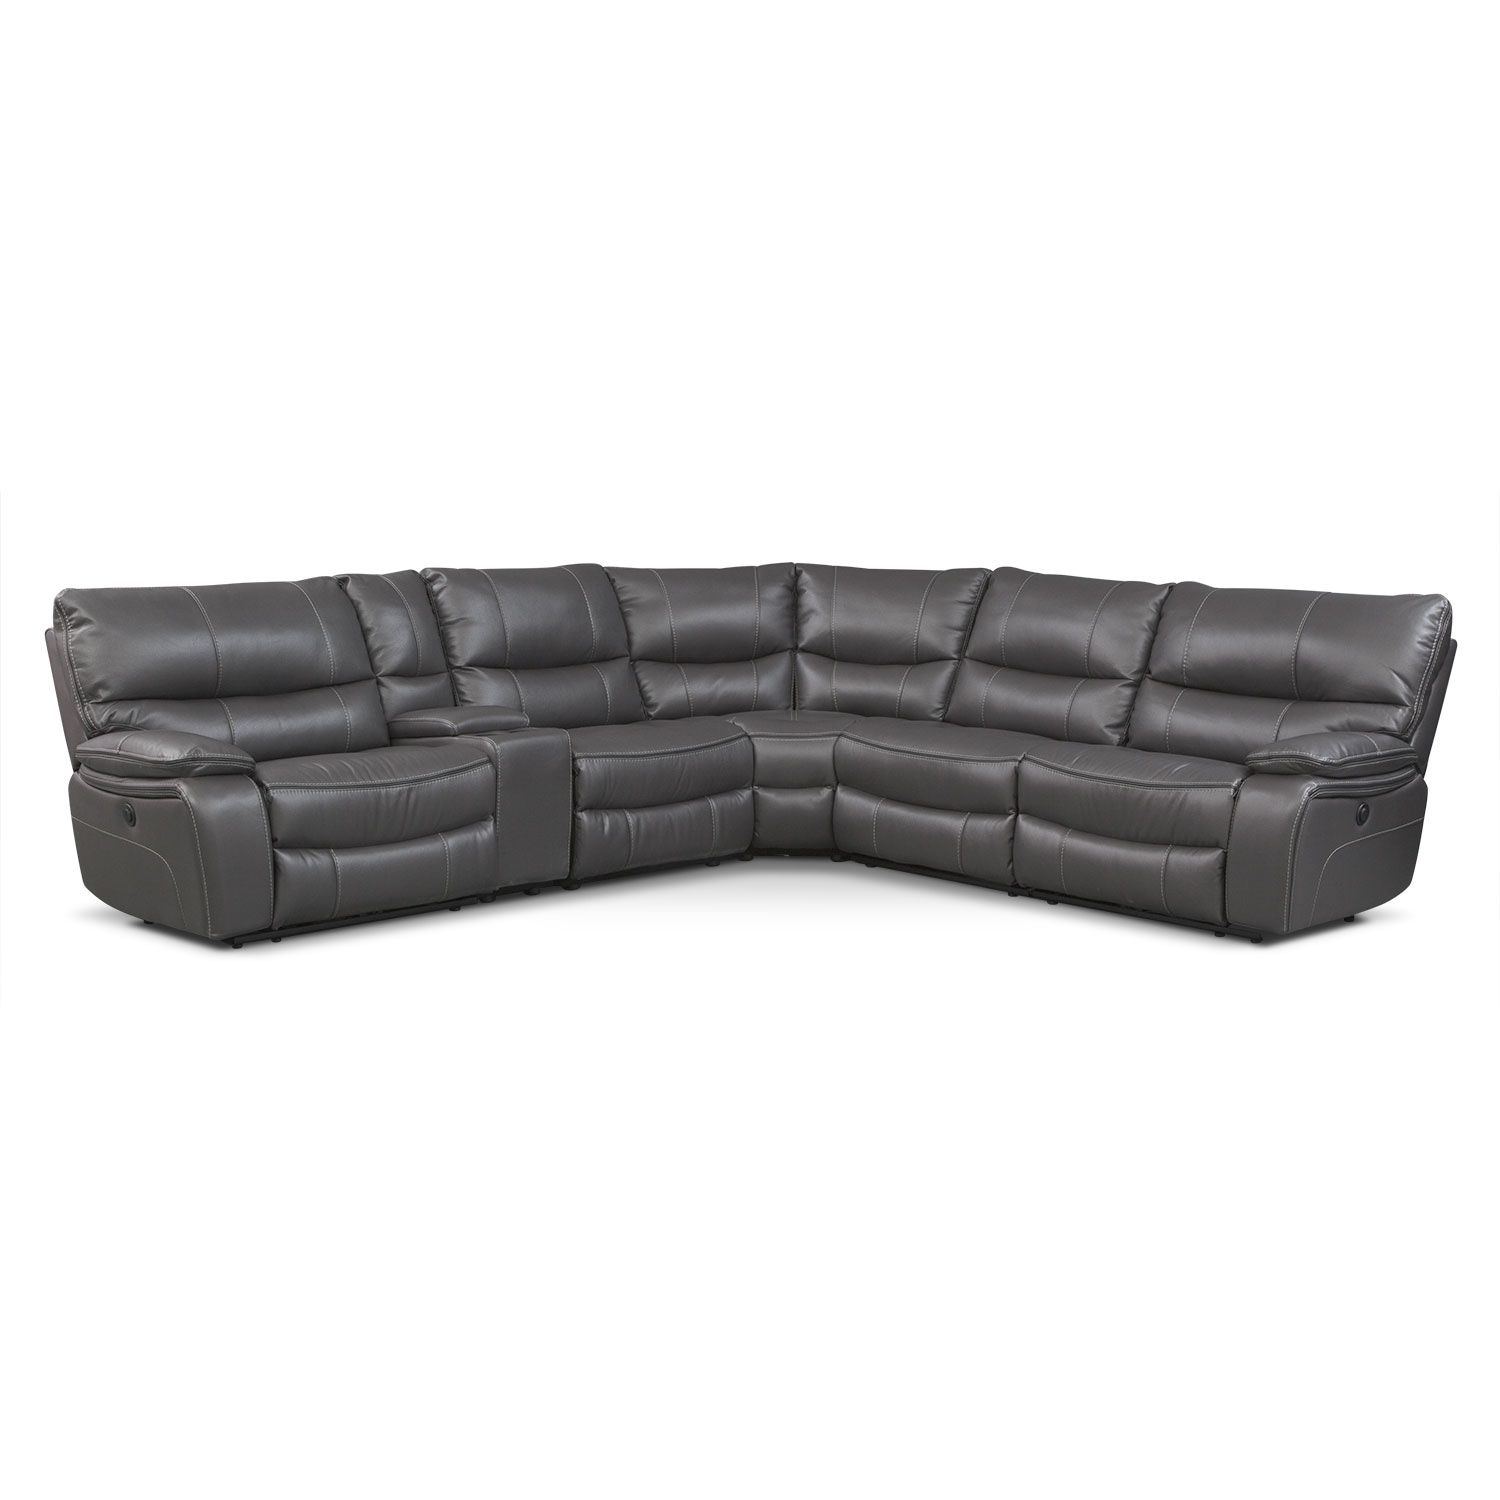 Orlando 6 Piece Power Reclining Sectional With 1 Stationary Chair With Regard To Kristen Silver Grey 6 Piece Power Reclining Sectionals (View 7 of 30)